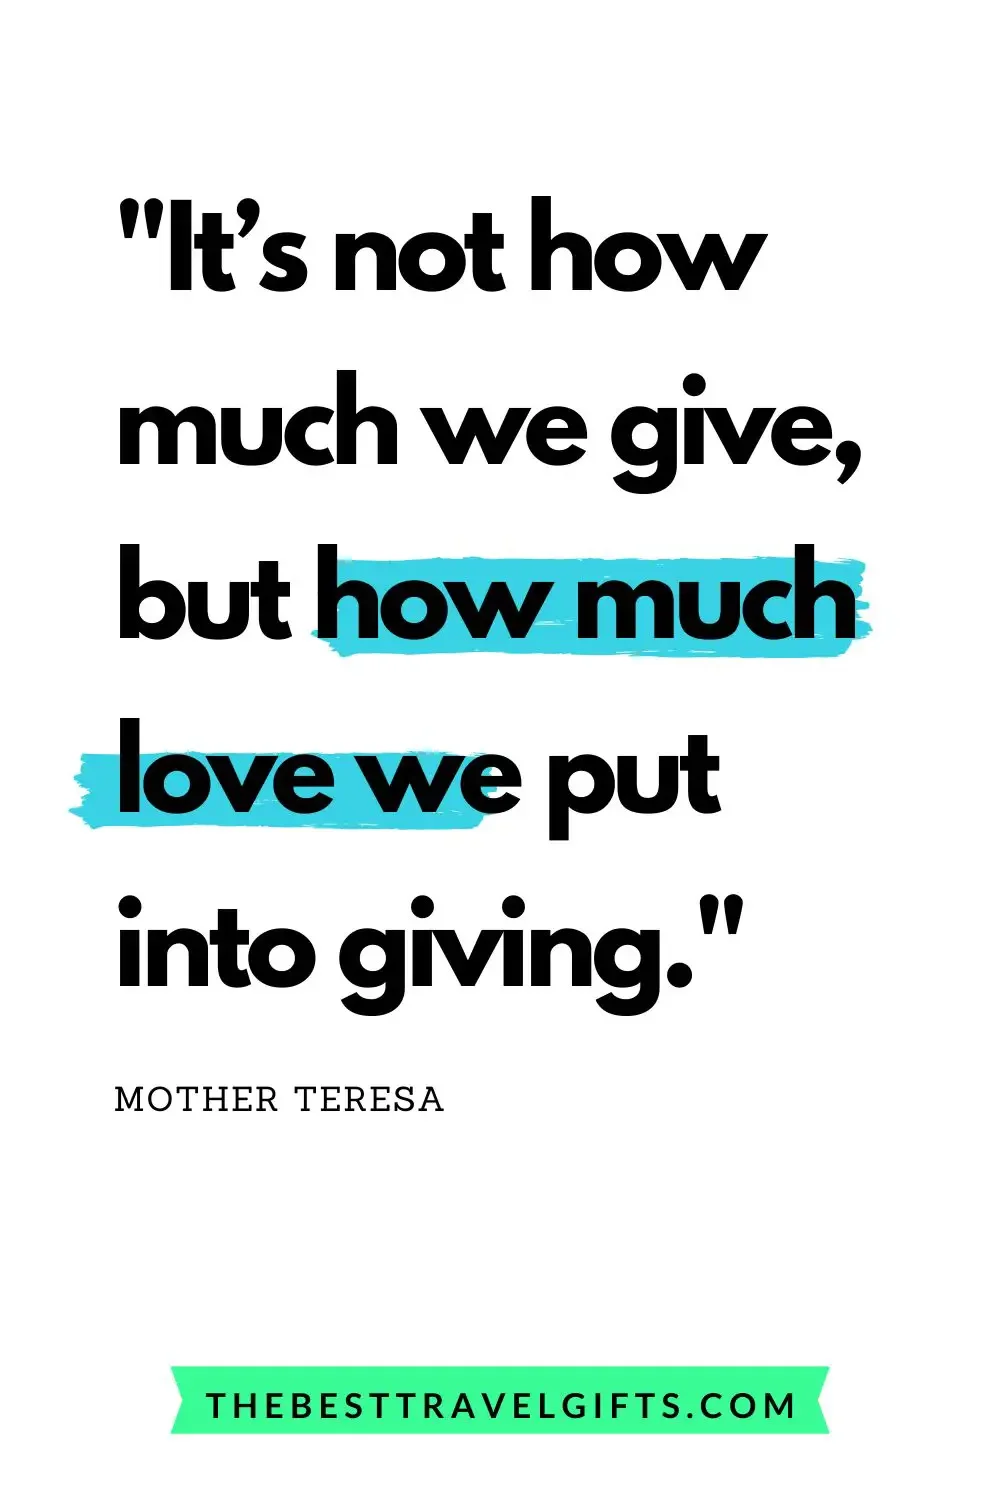 quote: It’s not how much we give, but how much love we put into giving